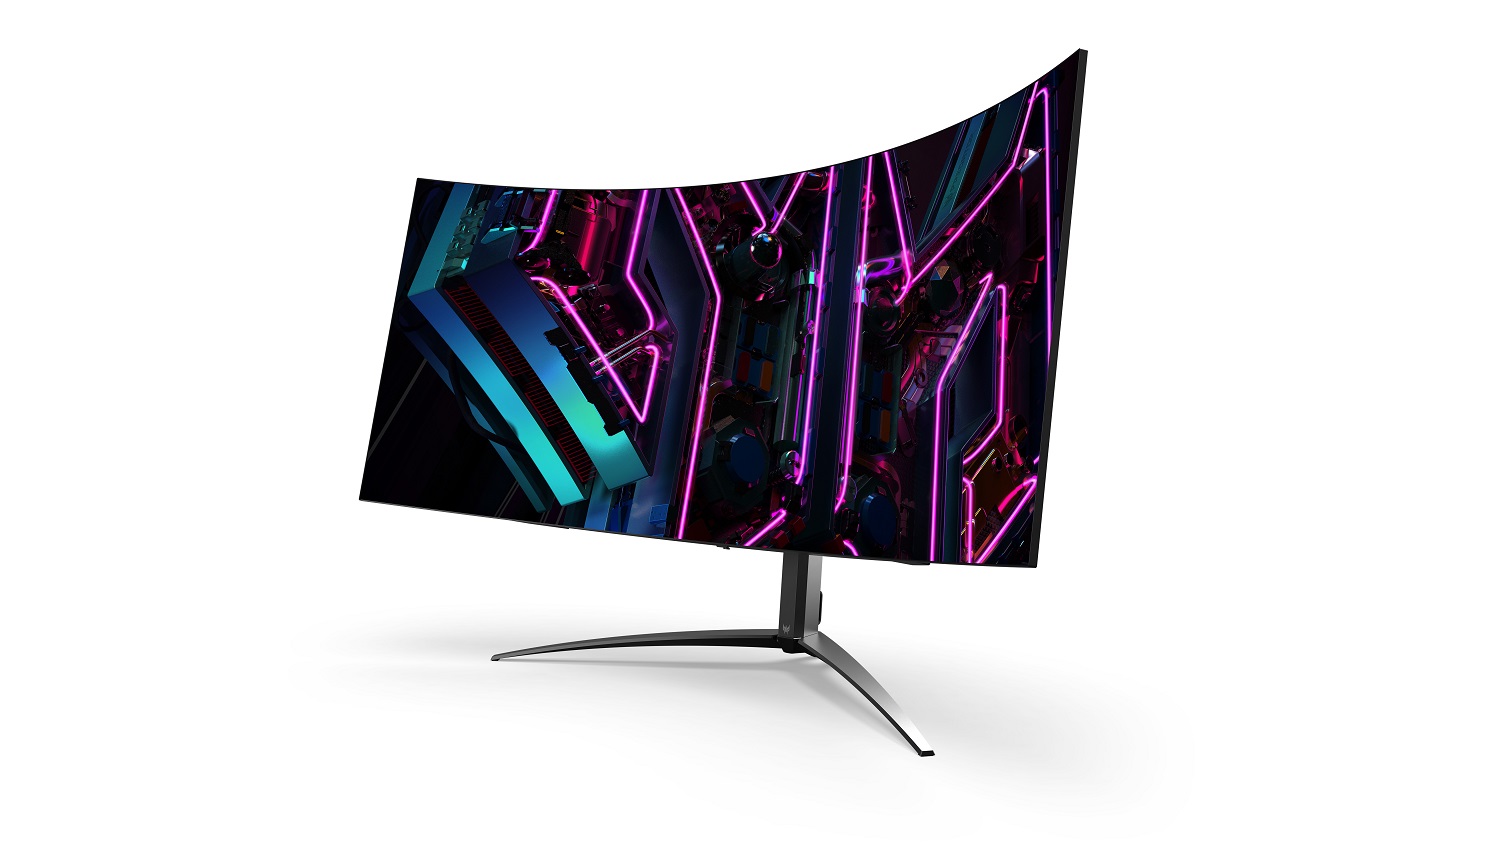 Acer has a 45-inch OLED Predator gaming monitor for CES 2023